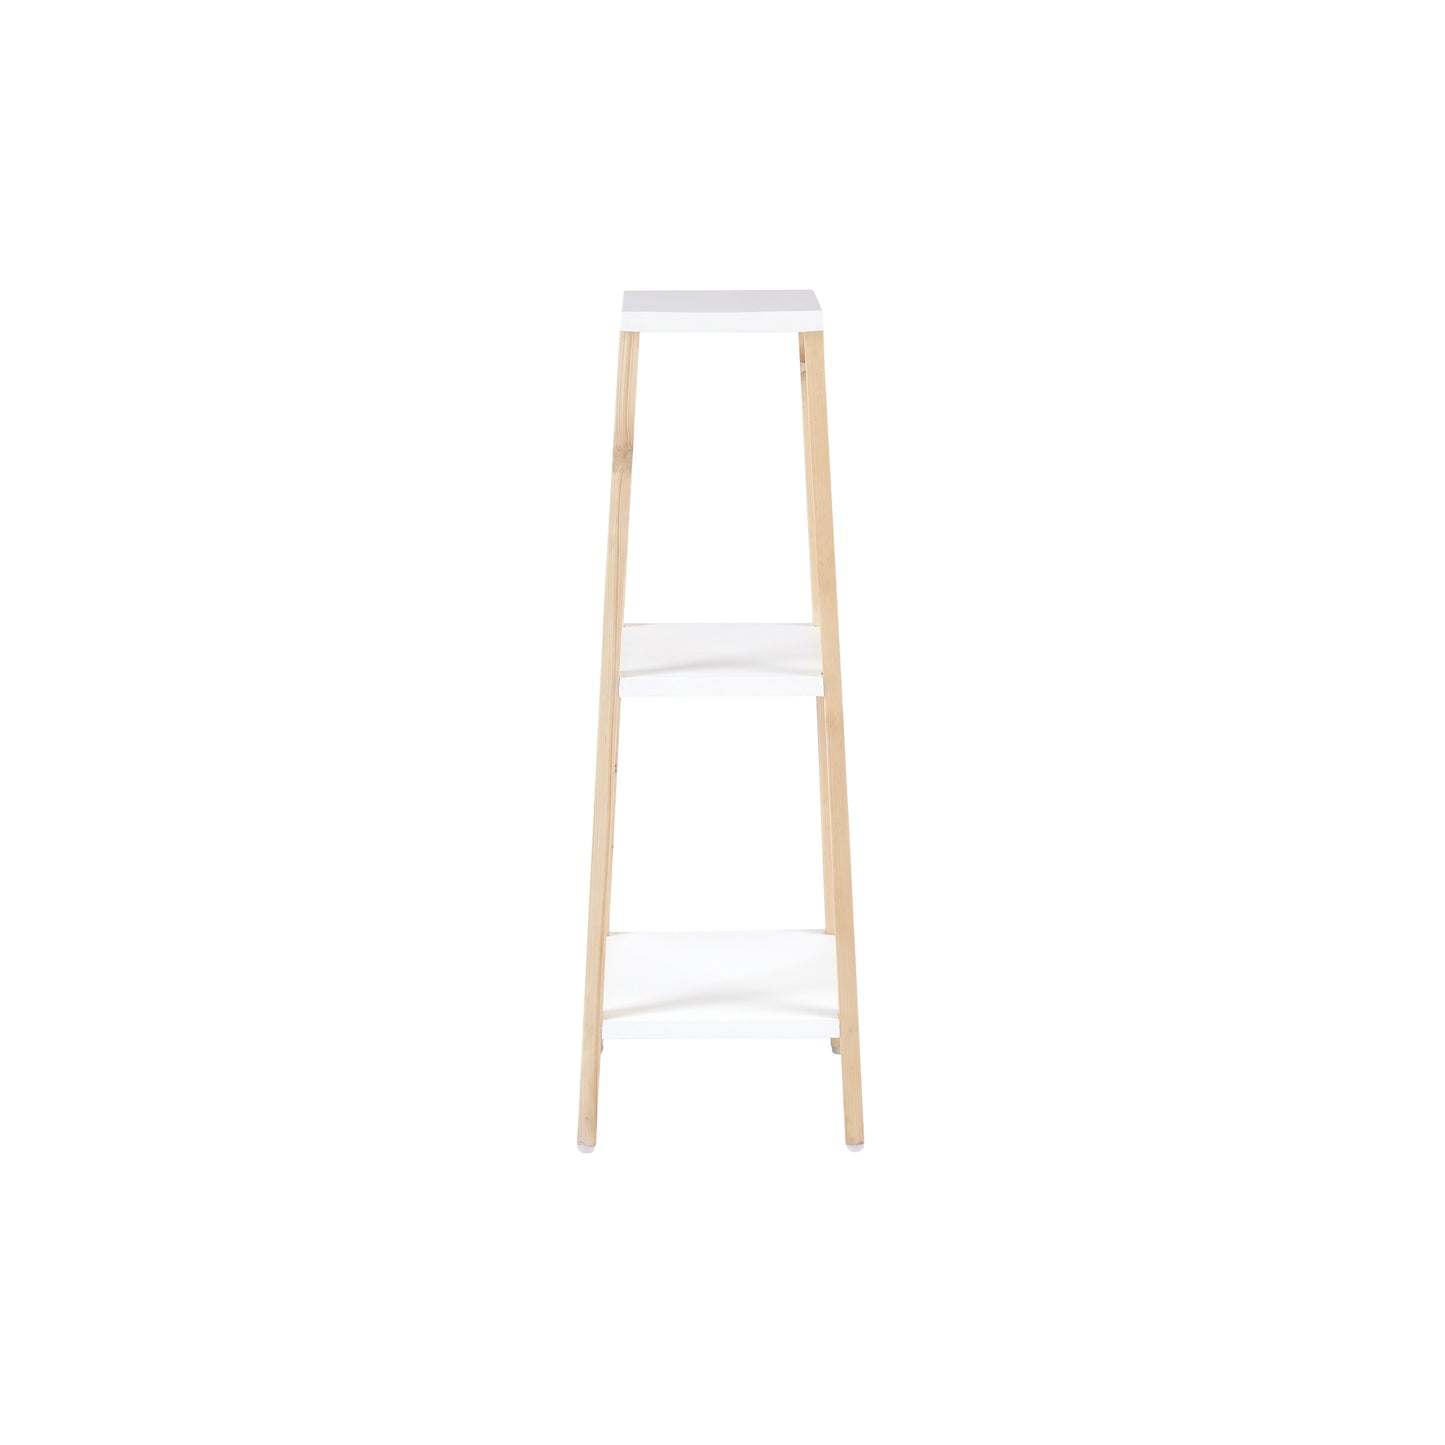 A Tiny Mistake Square Four Legged Tapering Three Tier Decorative Stand (Three Tiers) (White Base with Light Legs)